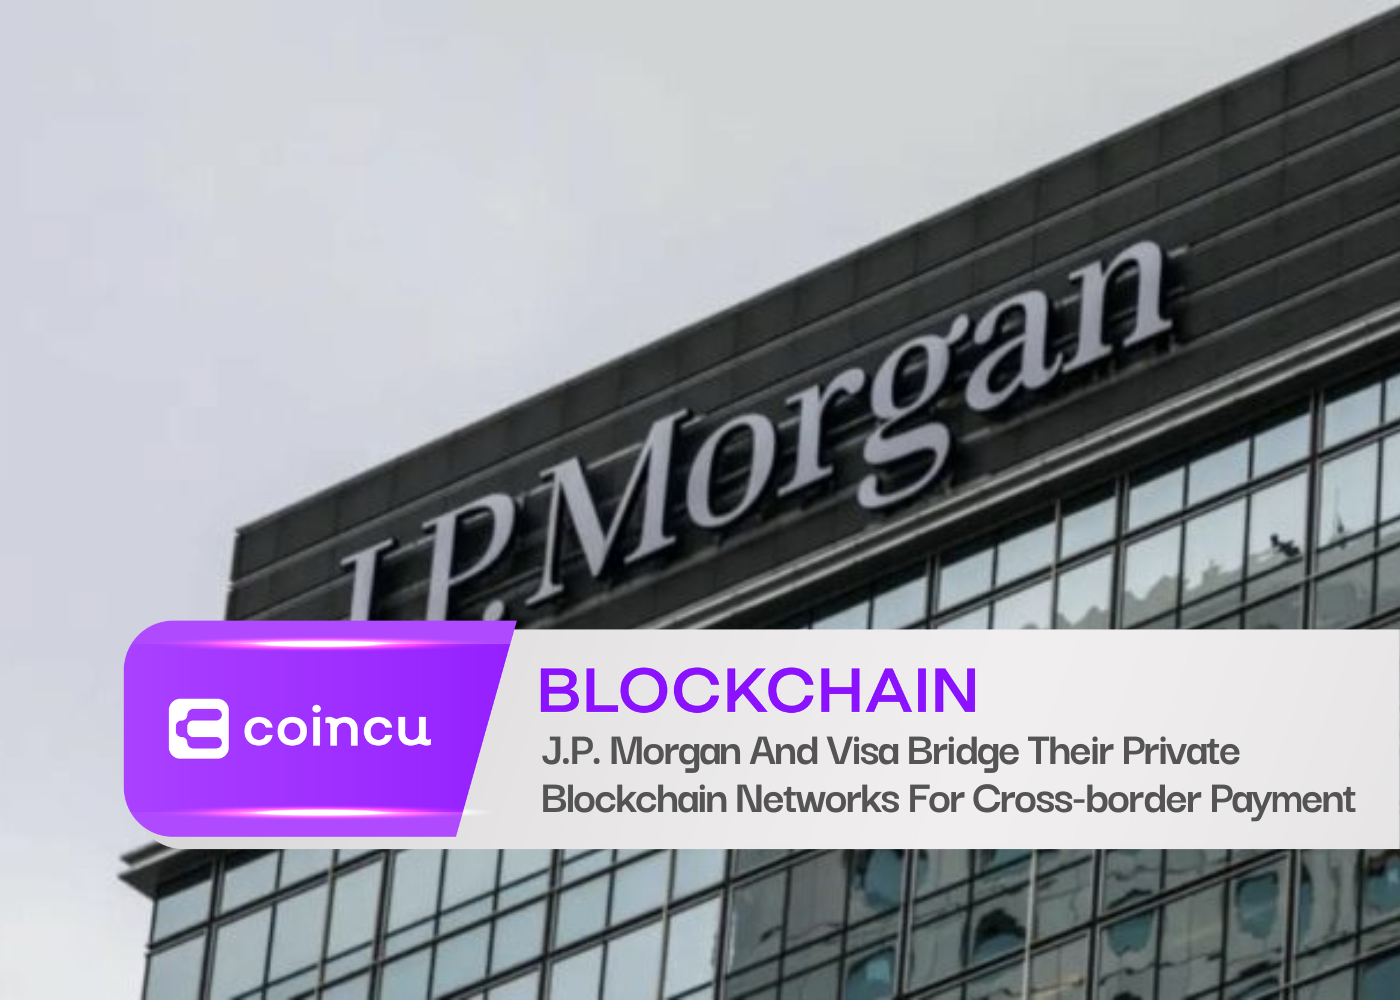 J.P. Morgan And Visa Bridge Their Private Blockchain Networks For Cross-border Payment